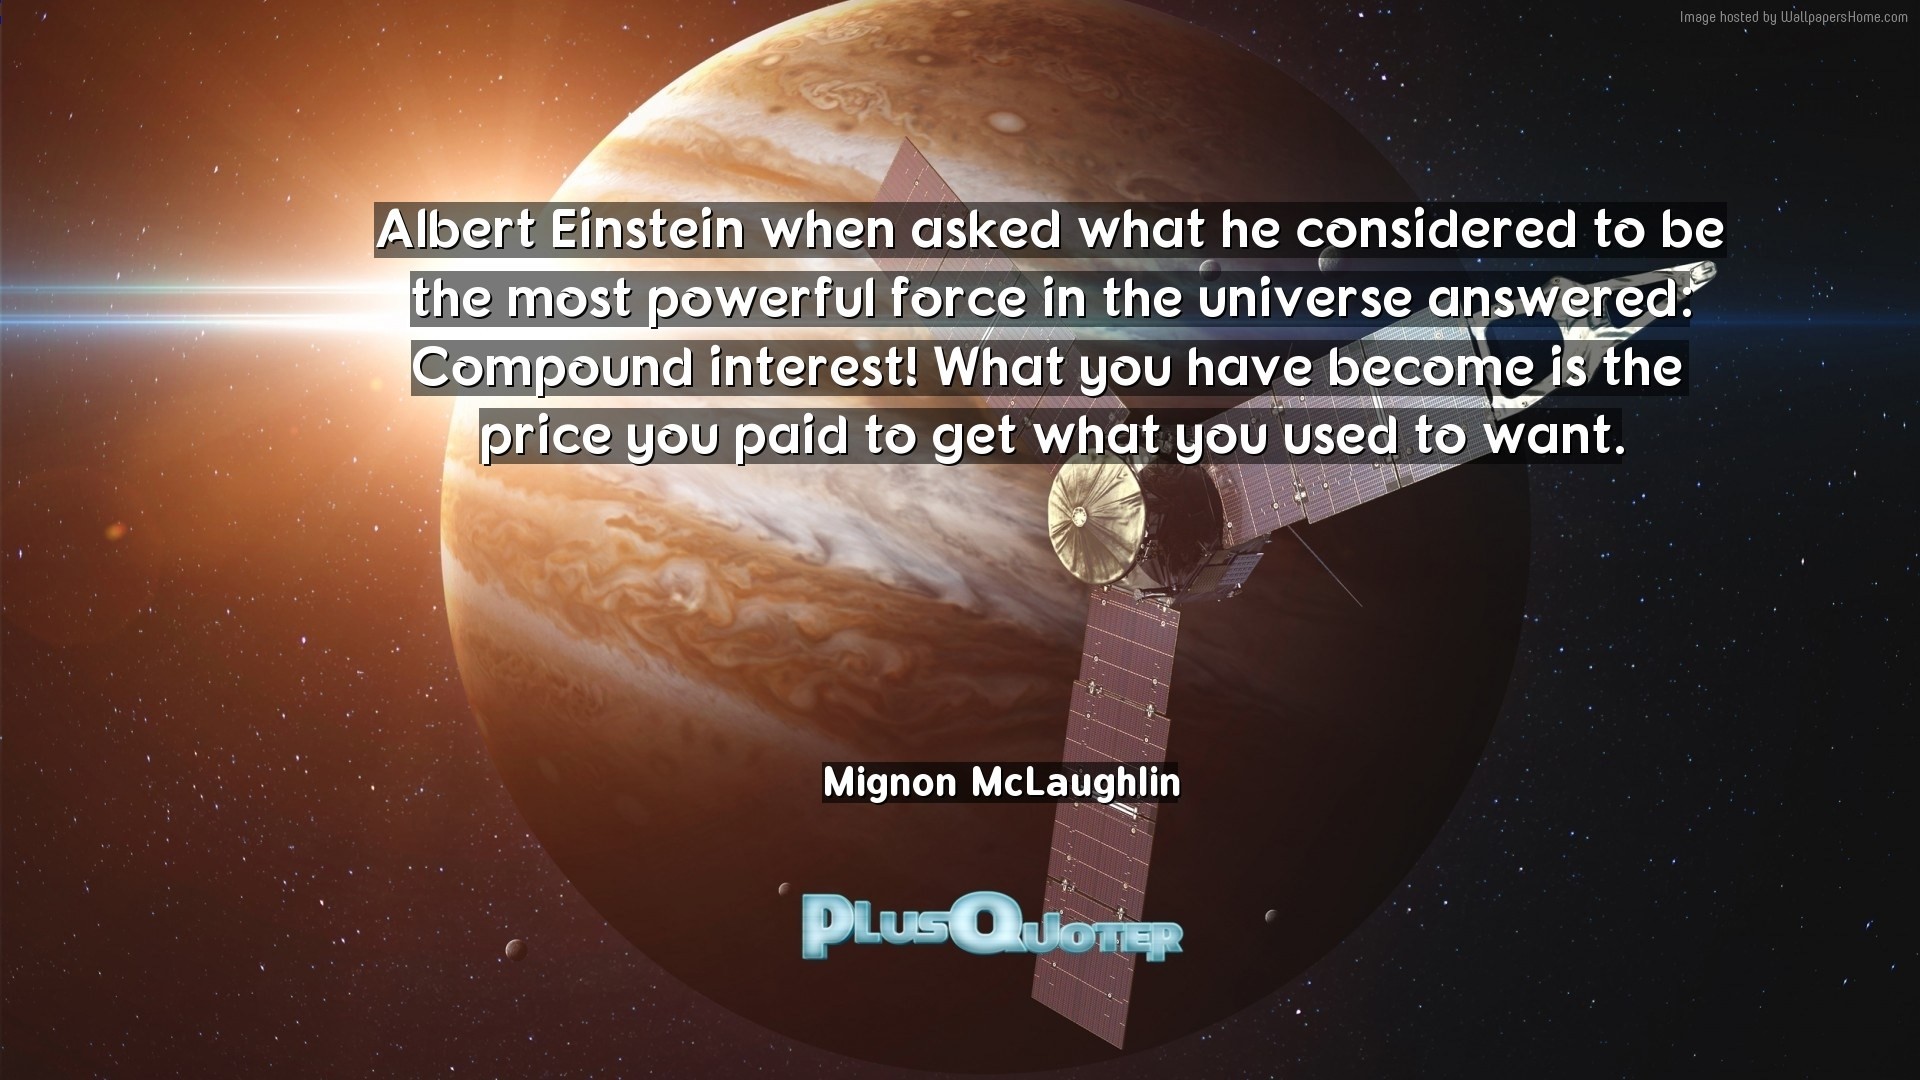 1920x1080 Download Wallpaper with inspirational Quotes- "Albert Einstein when asked  what he considered to be